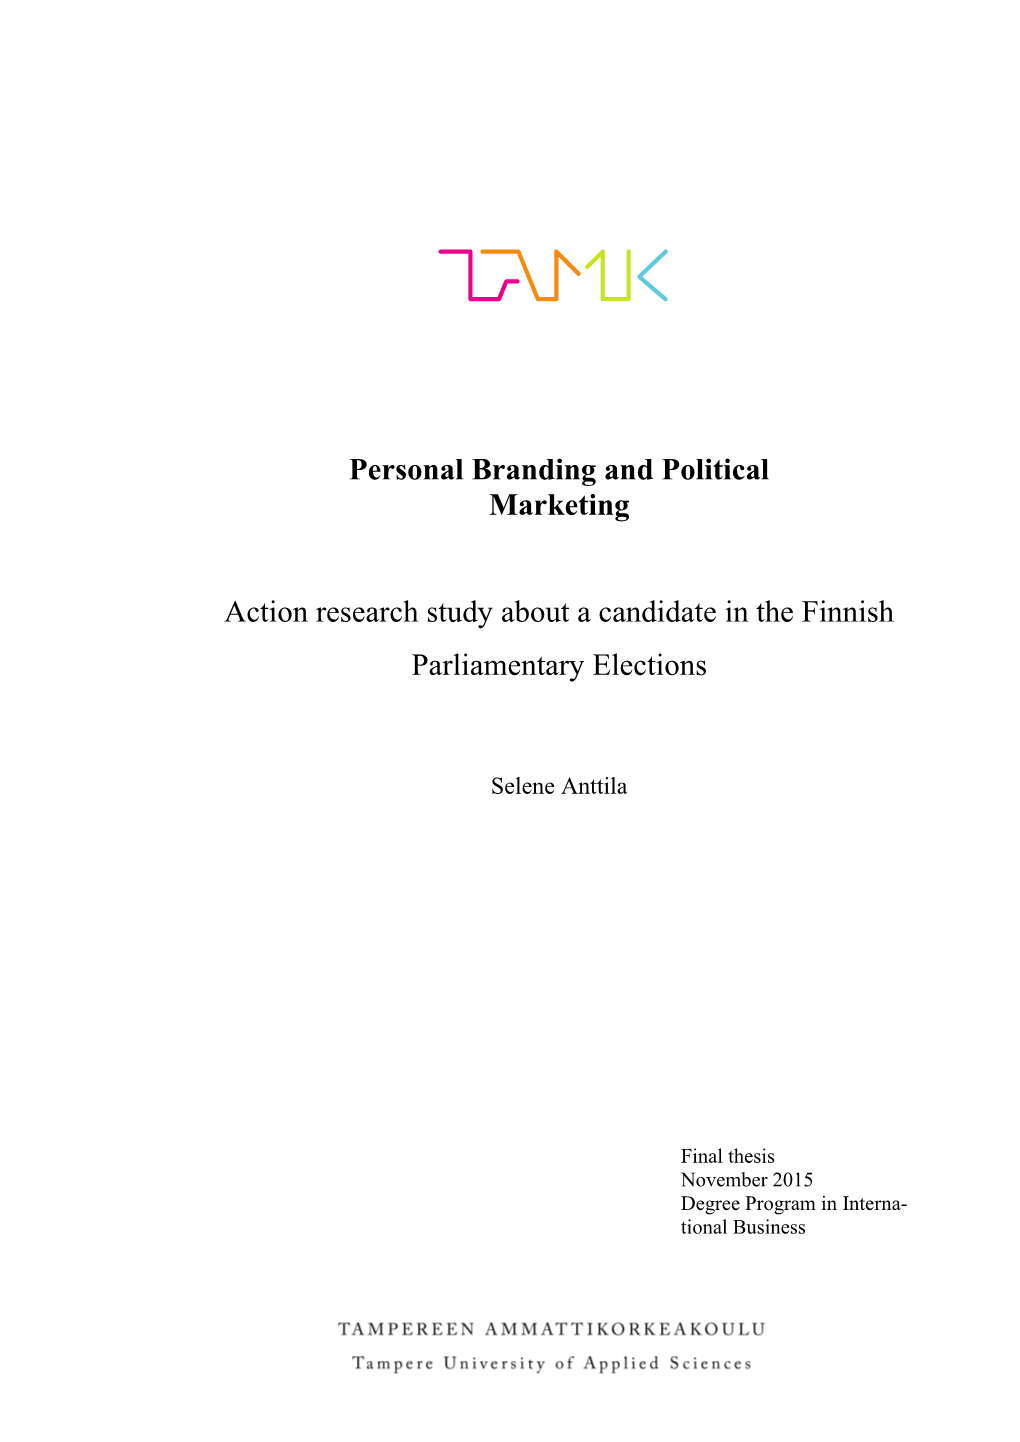 Personal Branding and Political Marketing Action Research Study About Personal Branding in the Finnish Parliamentary Elections